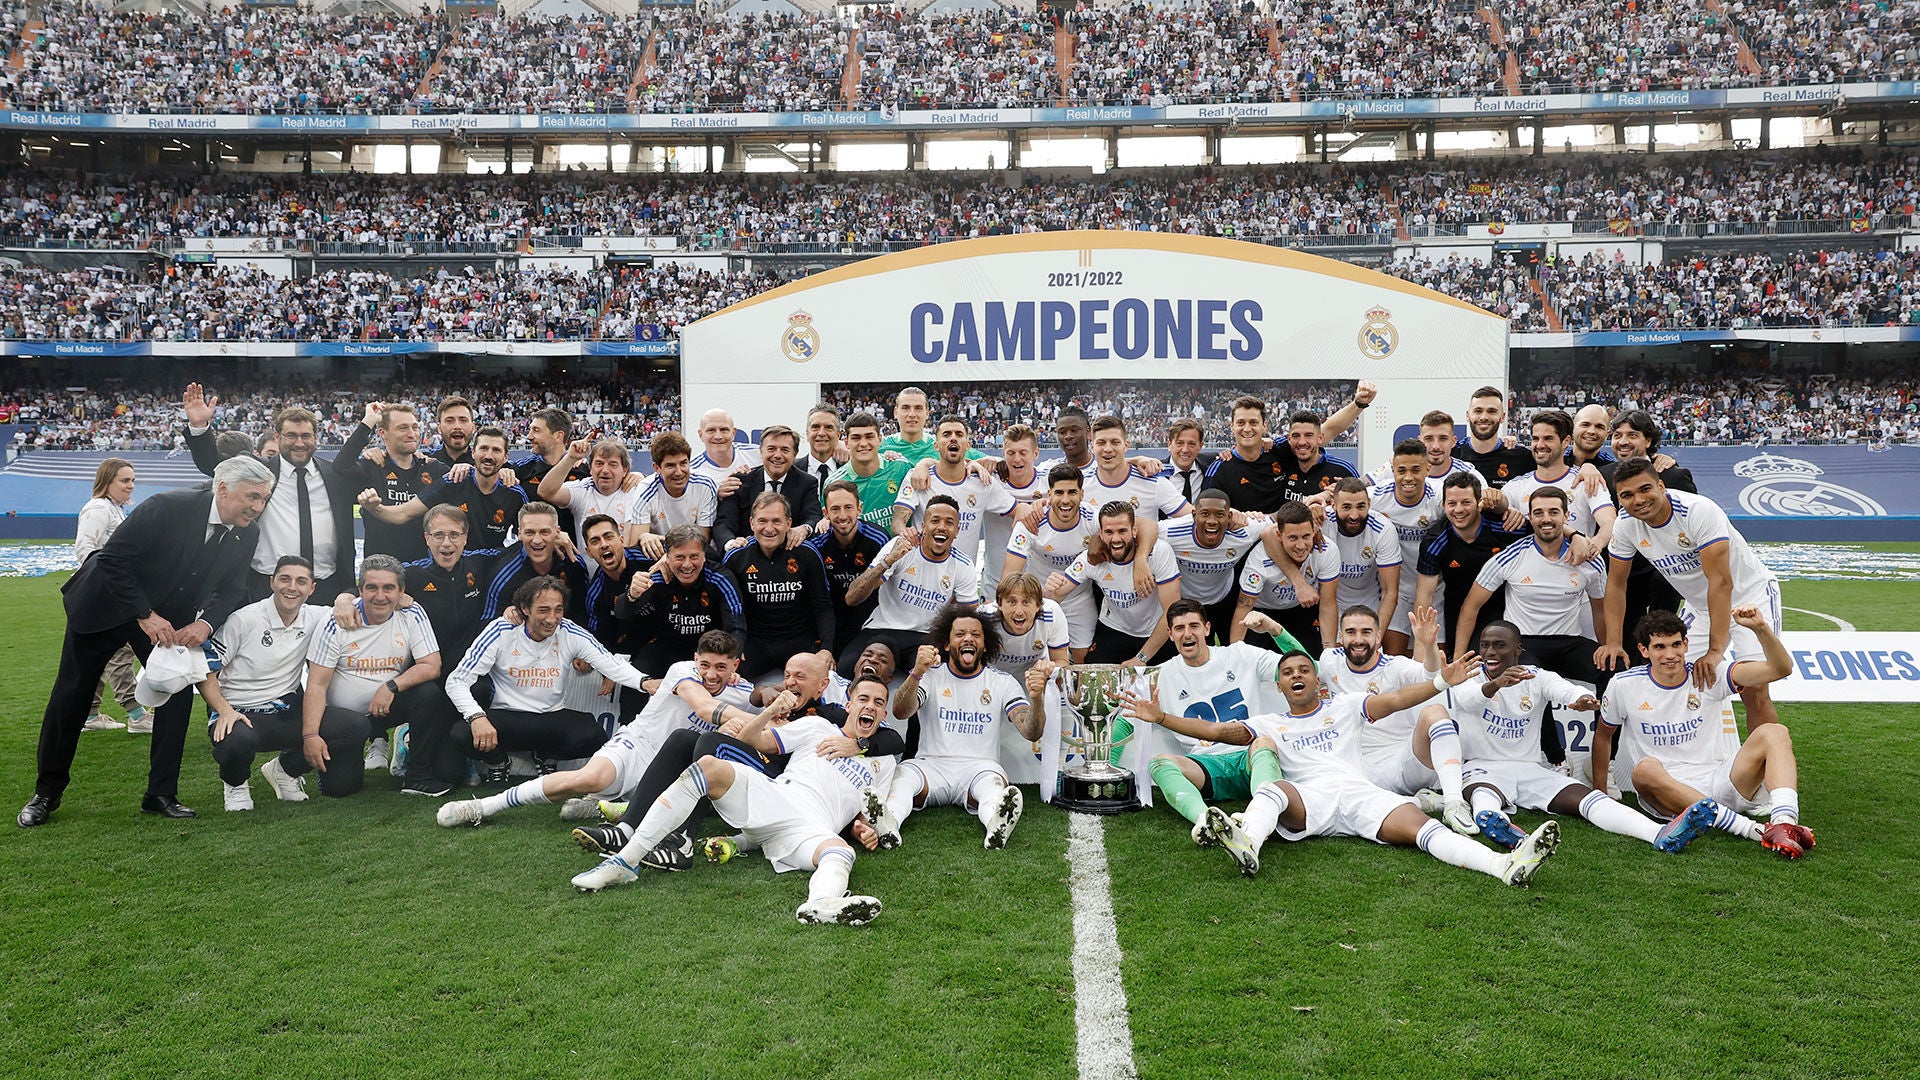 Second anniversary of the 35th LaLiga title